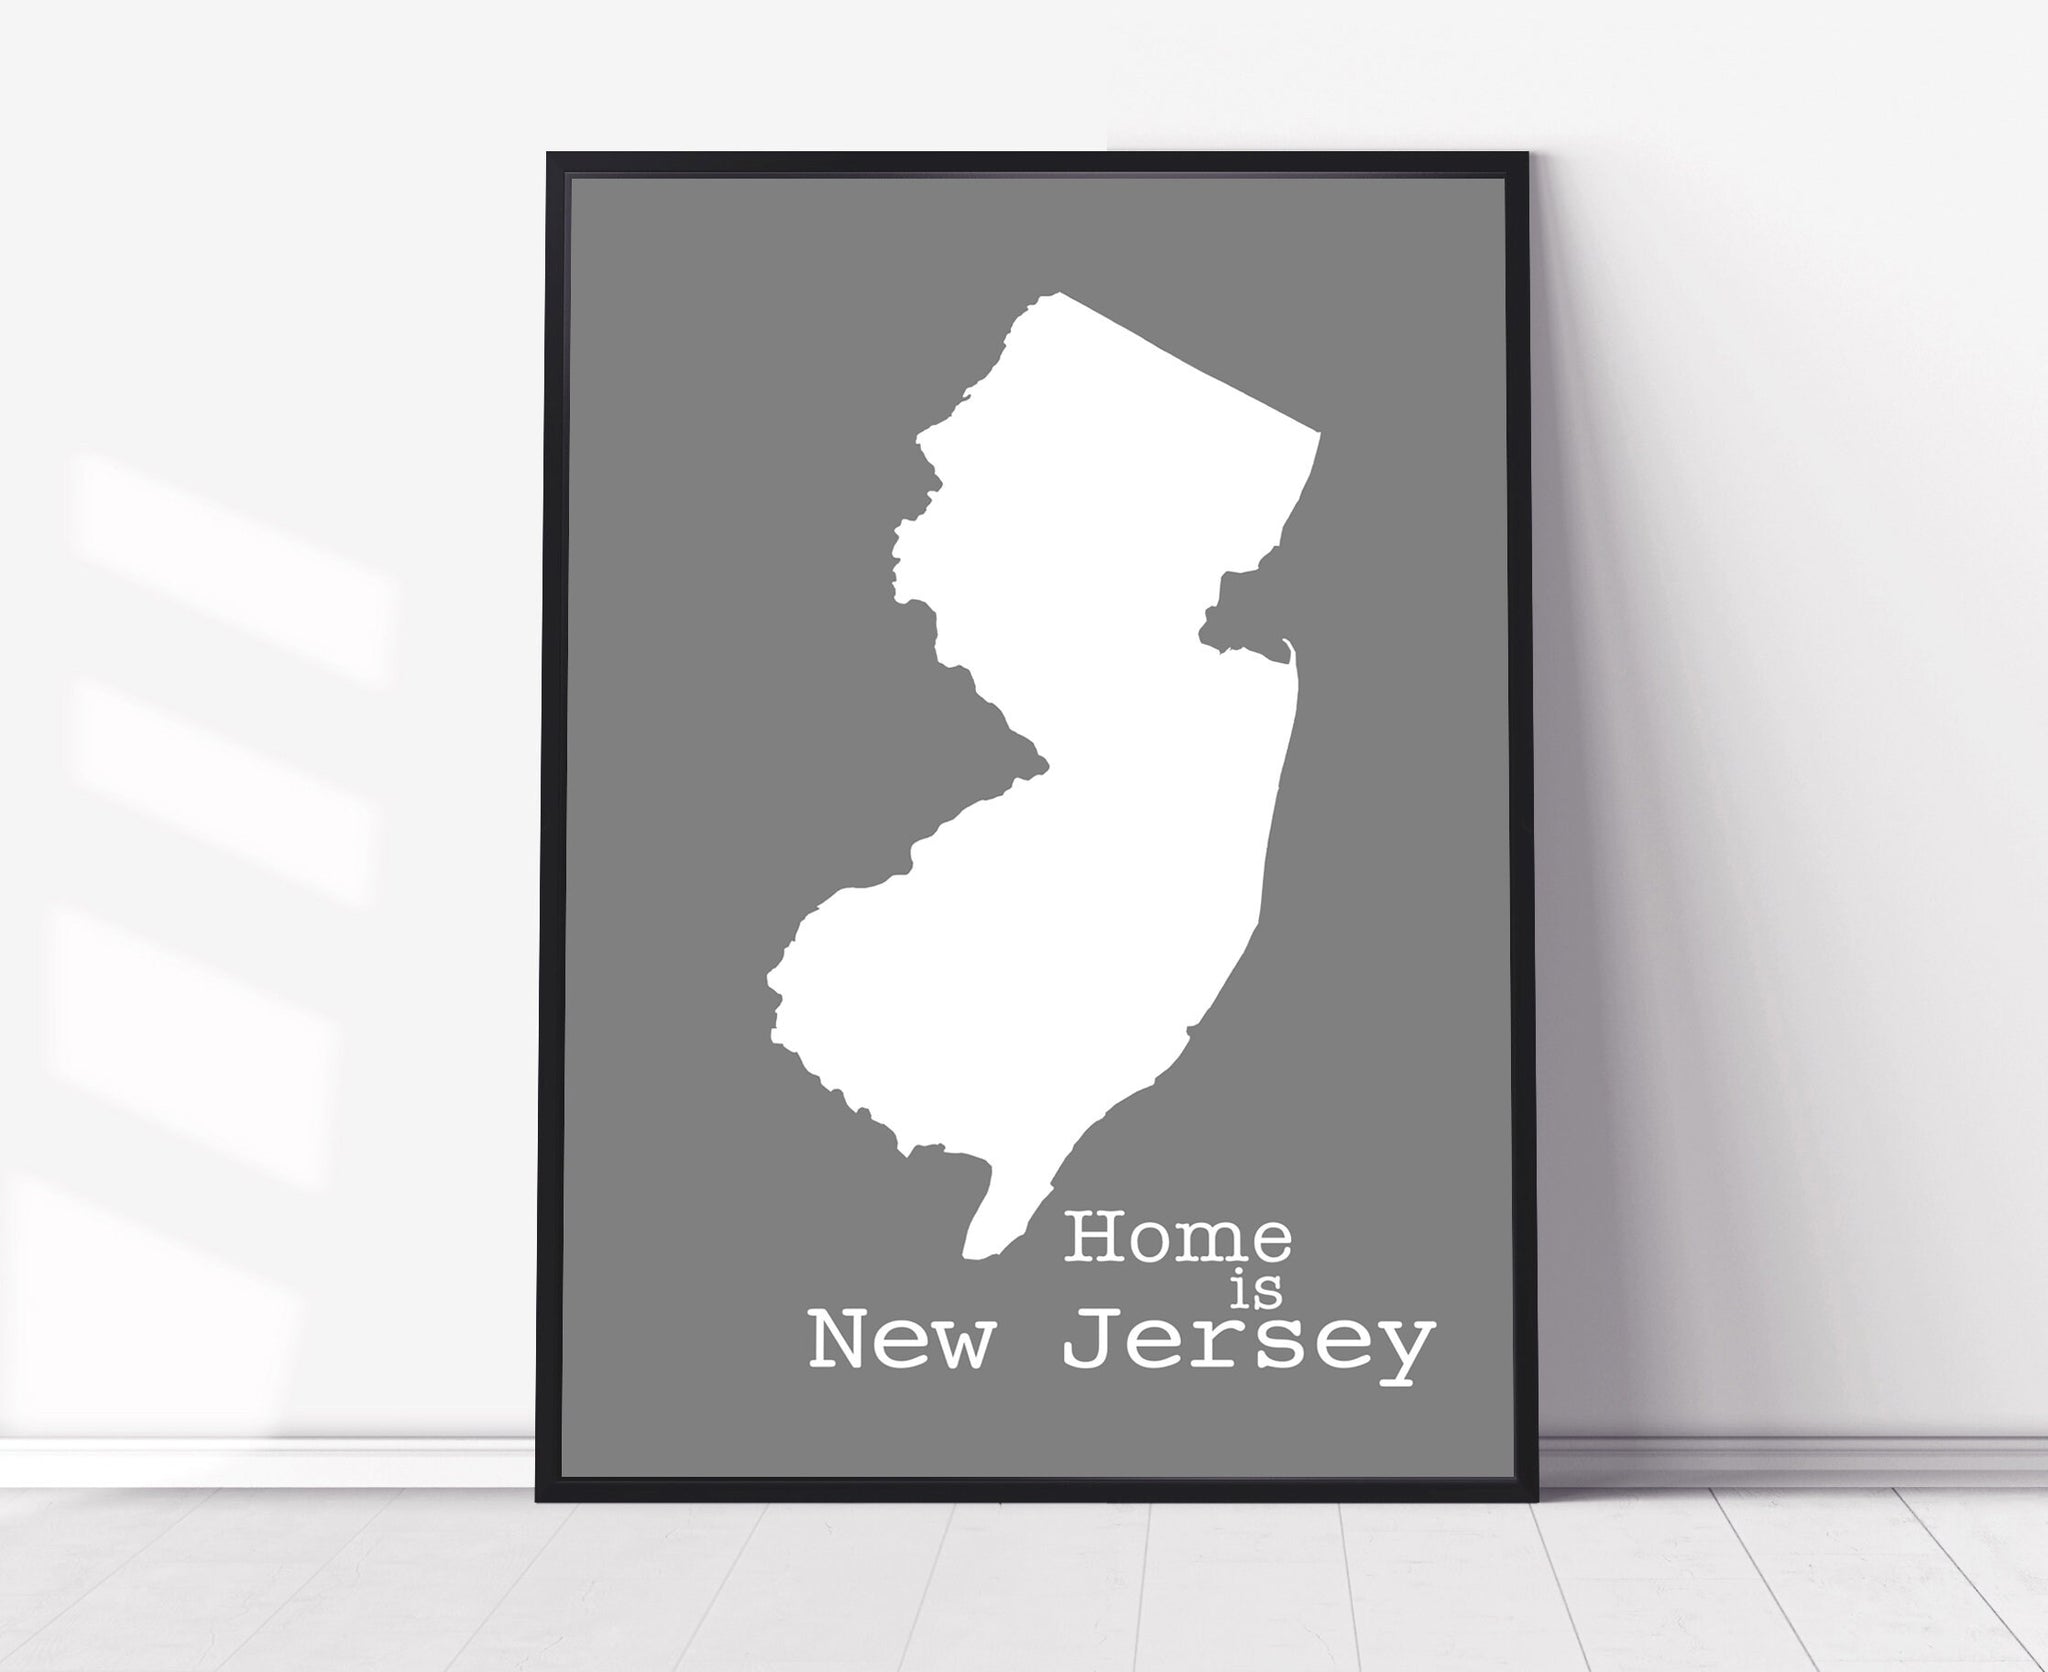 New Jersey Map Wall Art, New Jersey Modern Map Poster Print, City map wall decor, New Jersey State Poster, Family room wall decor,Office art